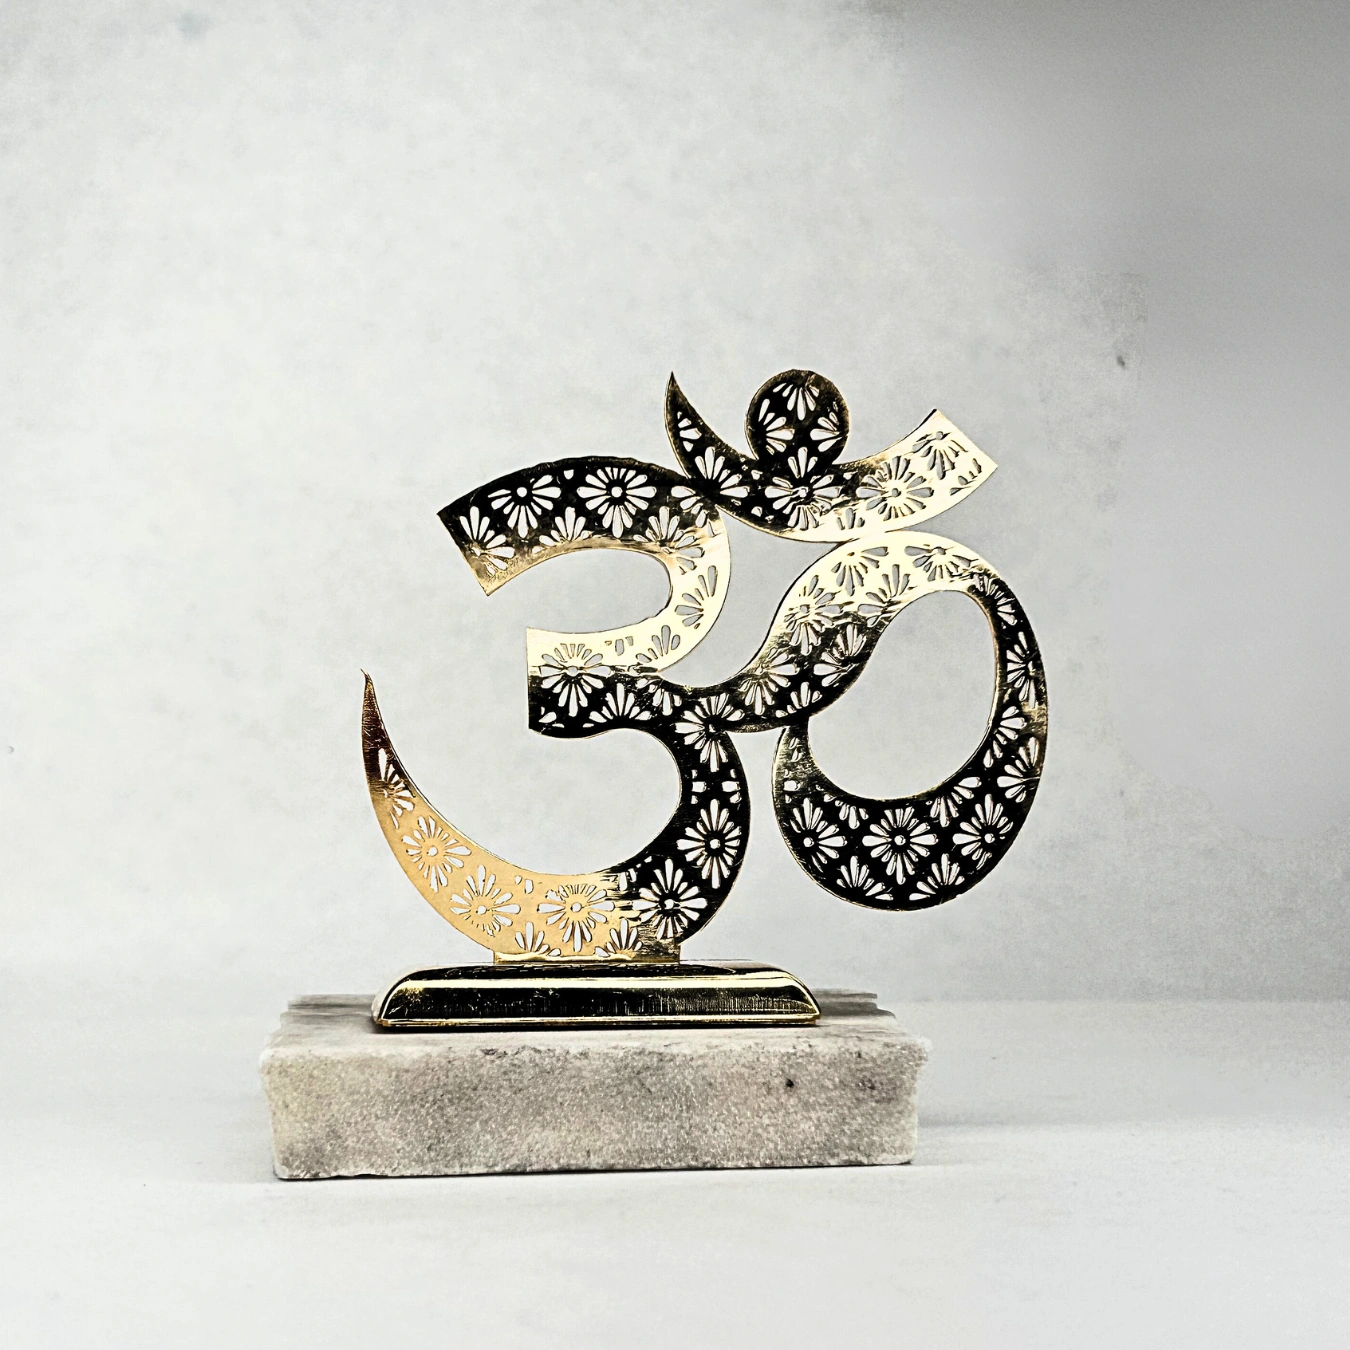 OM Harmony A beautifully crafted accessory, perfect for adding blessings and grace to your car's dashboard, serving as a decorative centerpiece on your table, or even adding chHindustanwaleOM Harmony